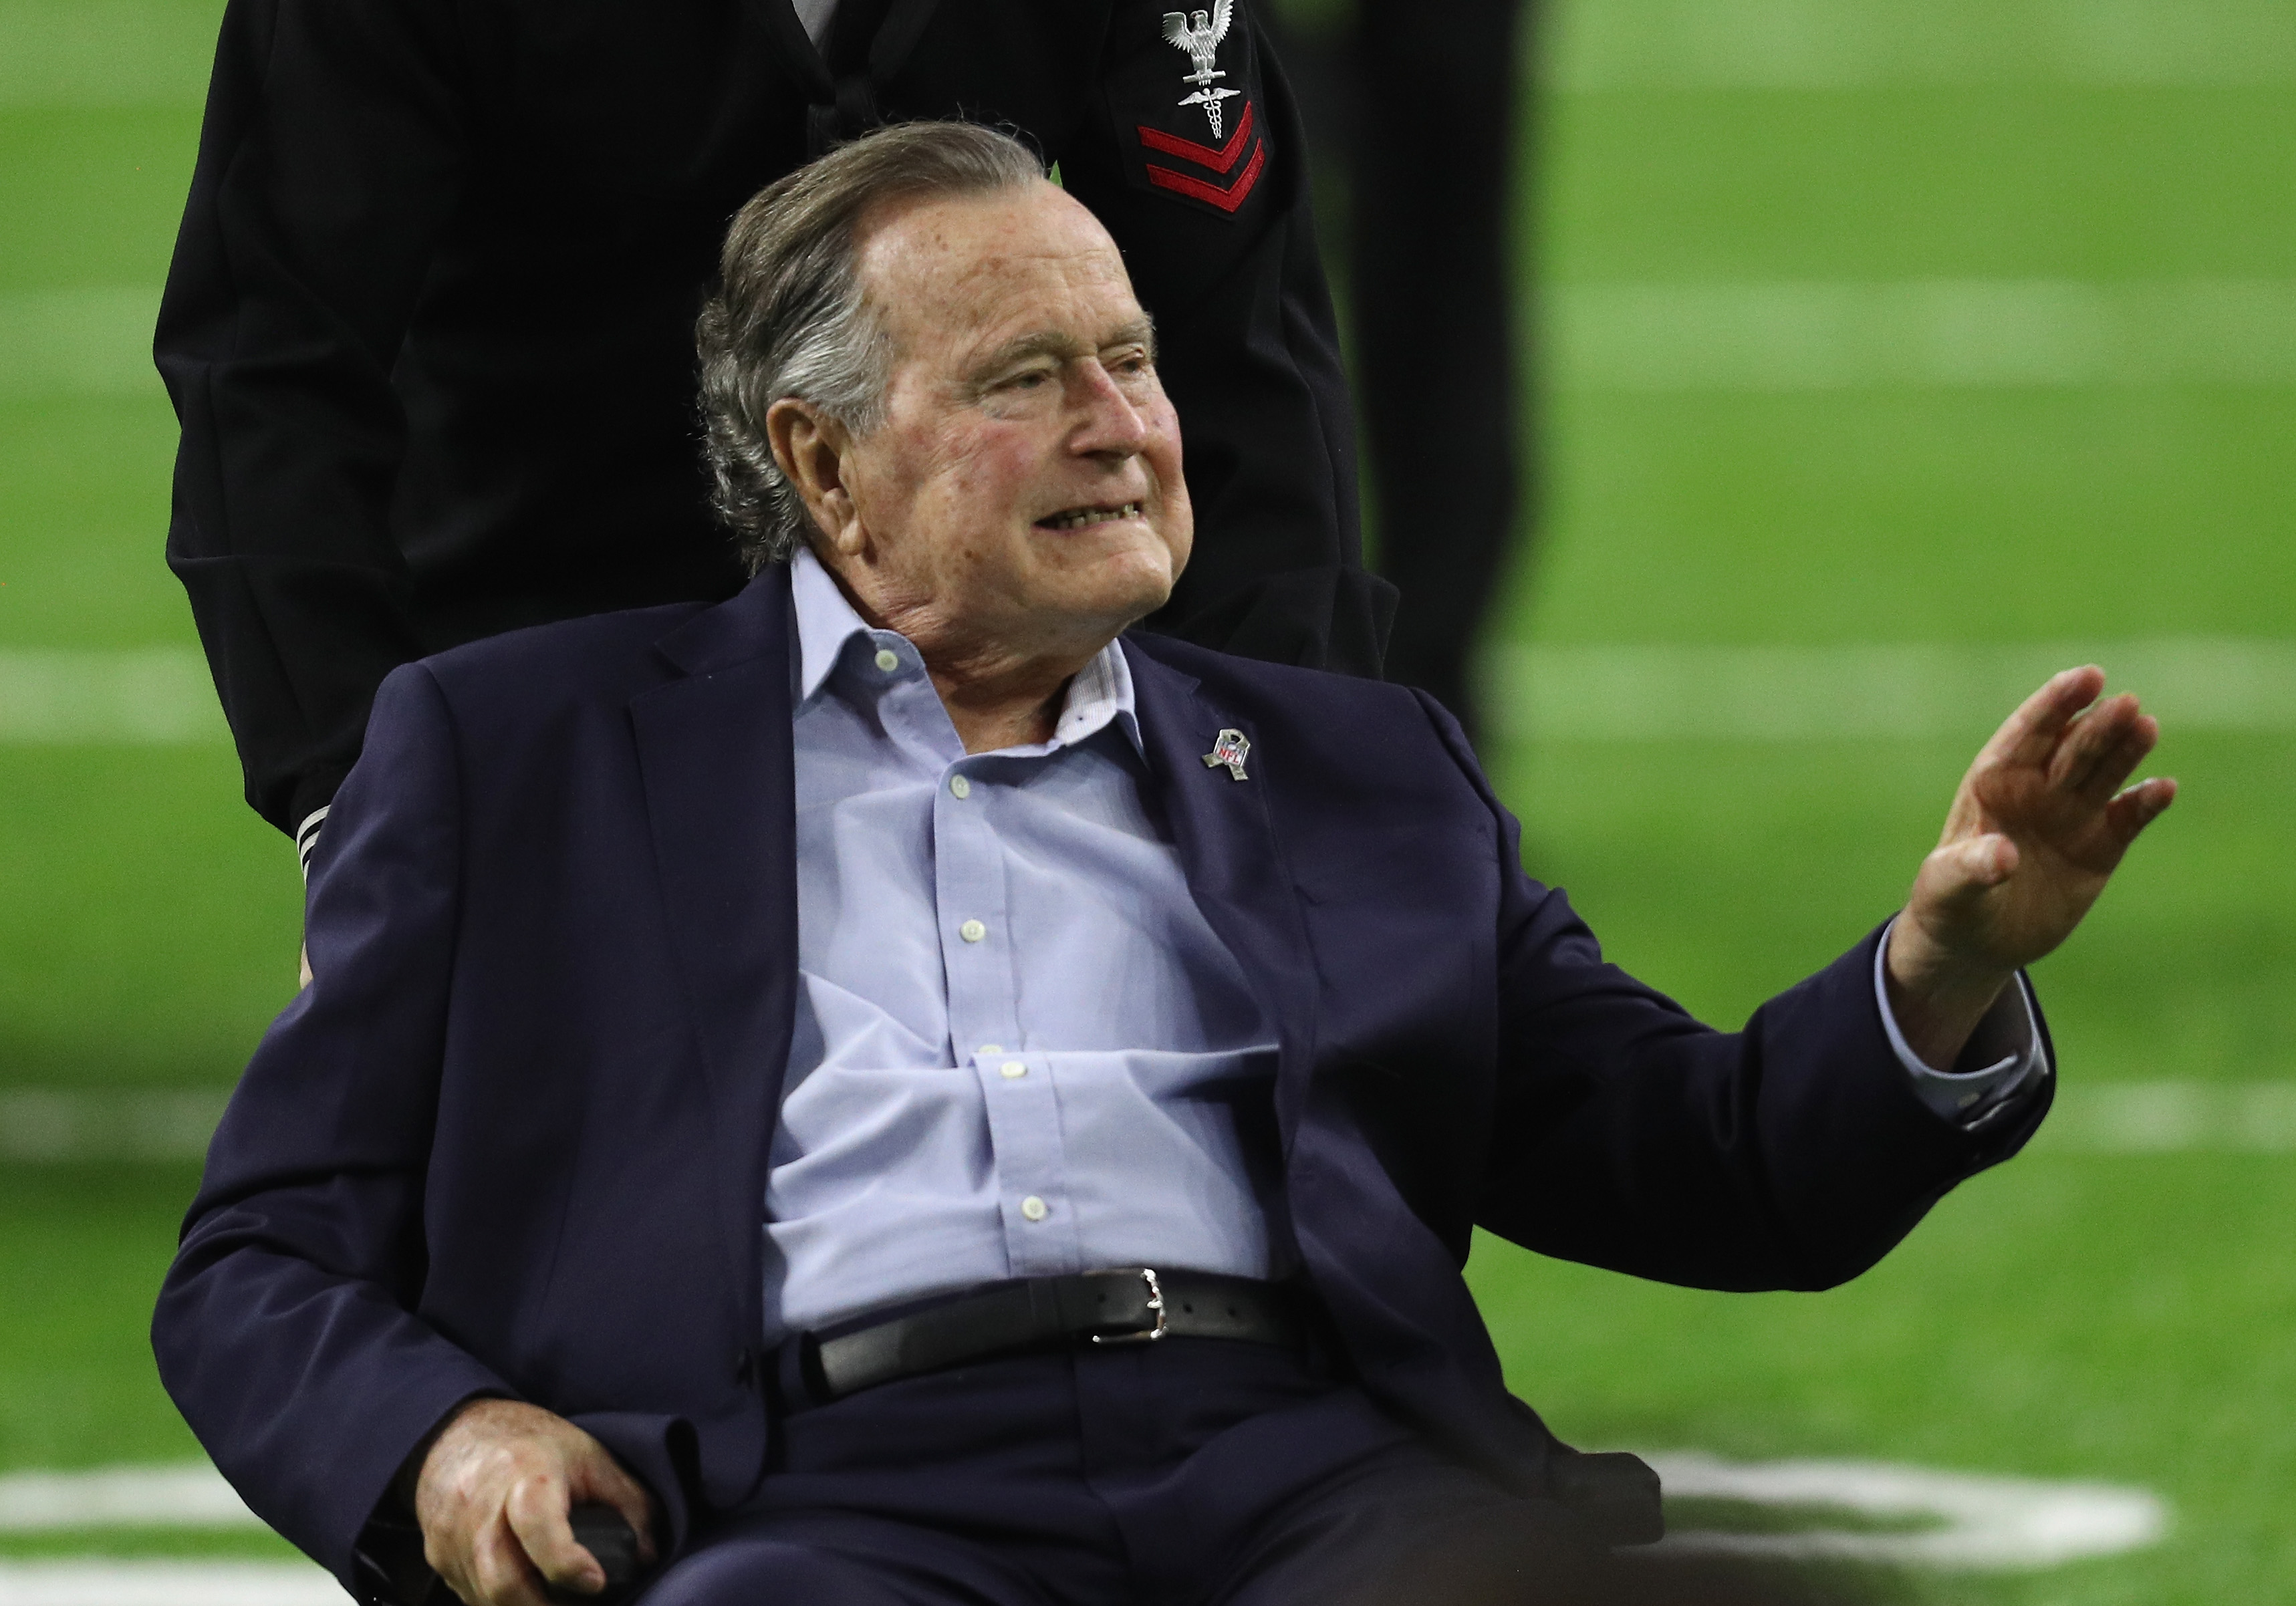 President George H.W. Bush arrives for the coin toss prior to Super Bowl 51 between the Atlanta Falcons and the New England Patriots at NRG Stadium on Feb. 5, 2017 in Houston, Texas. (Patrick Smith/Getty Images)